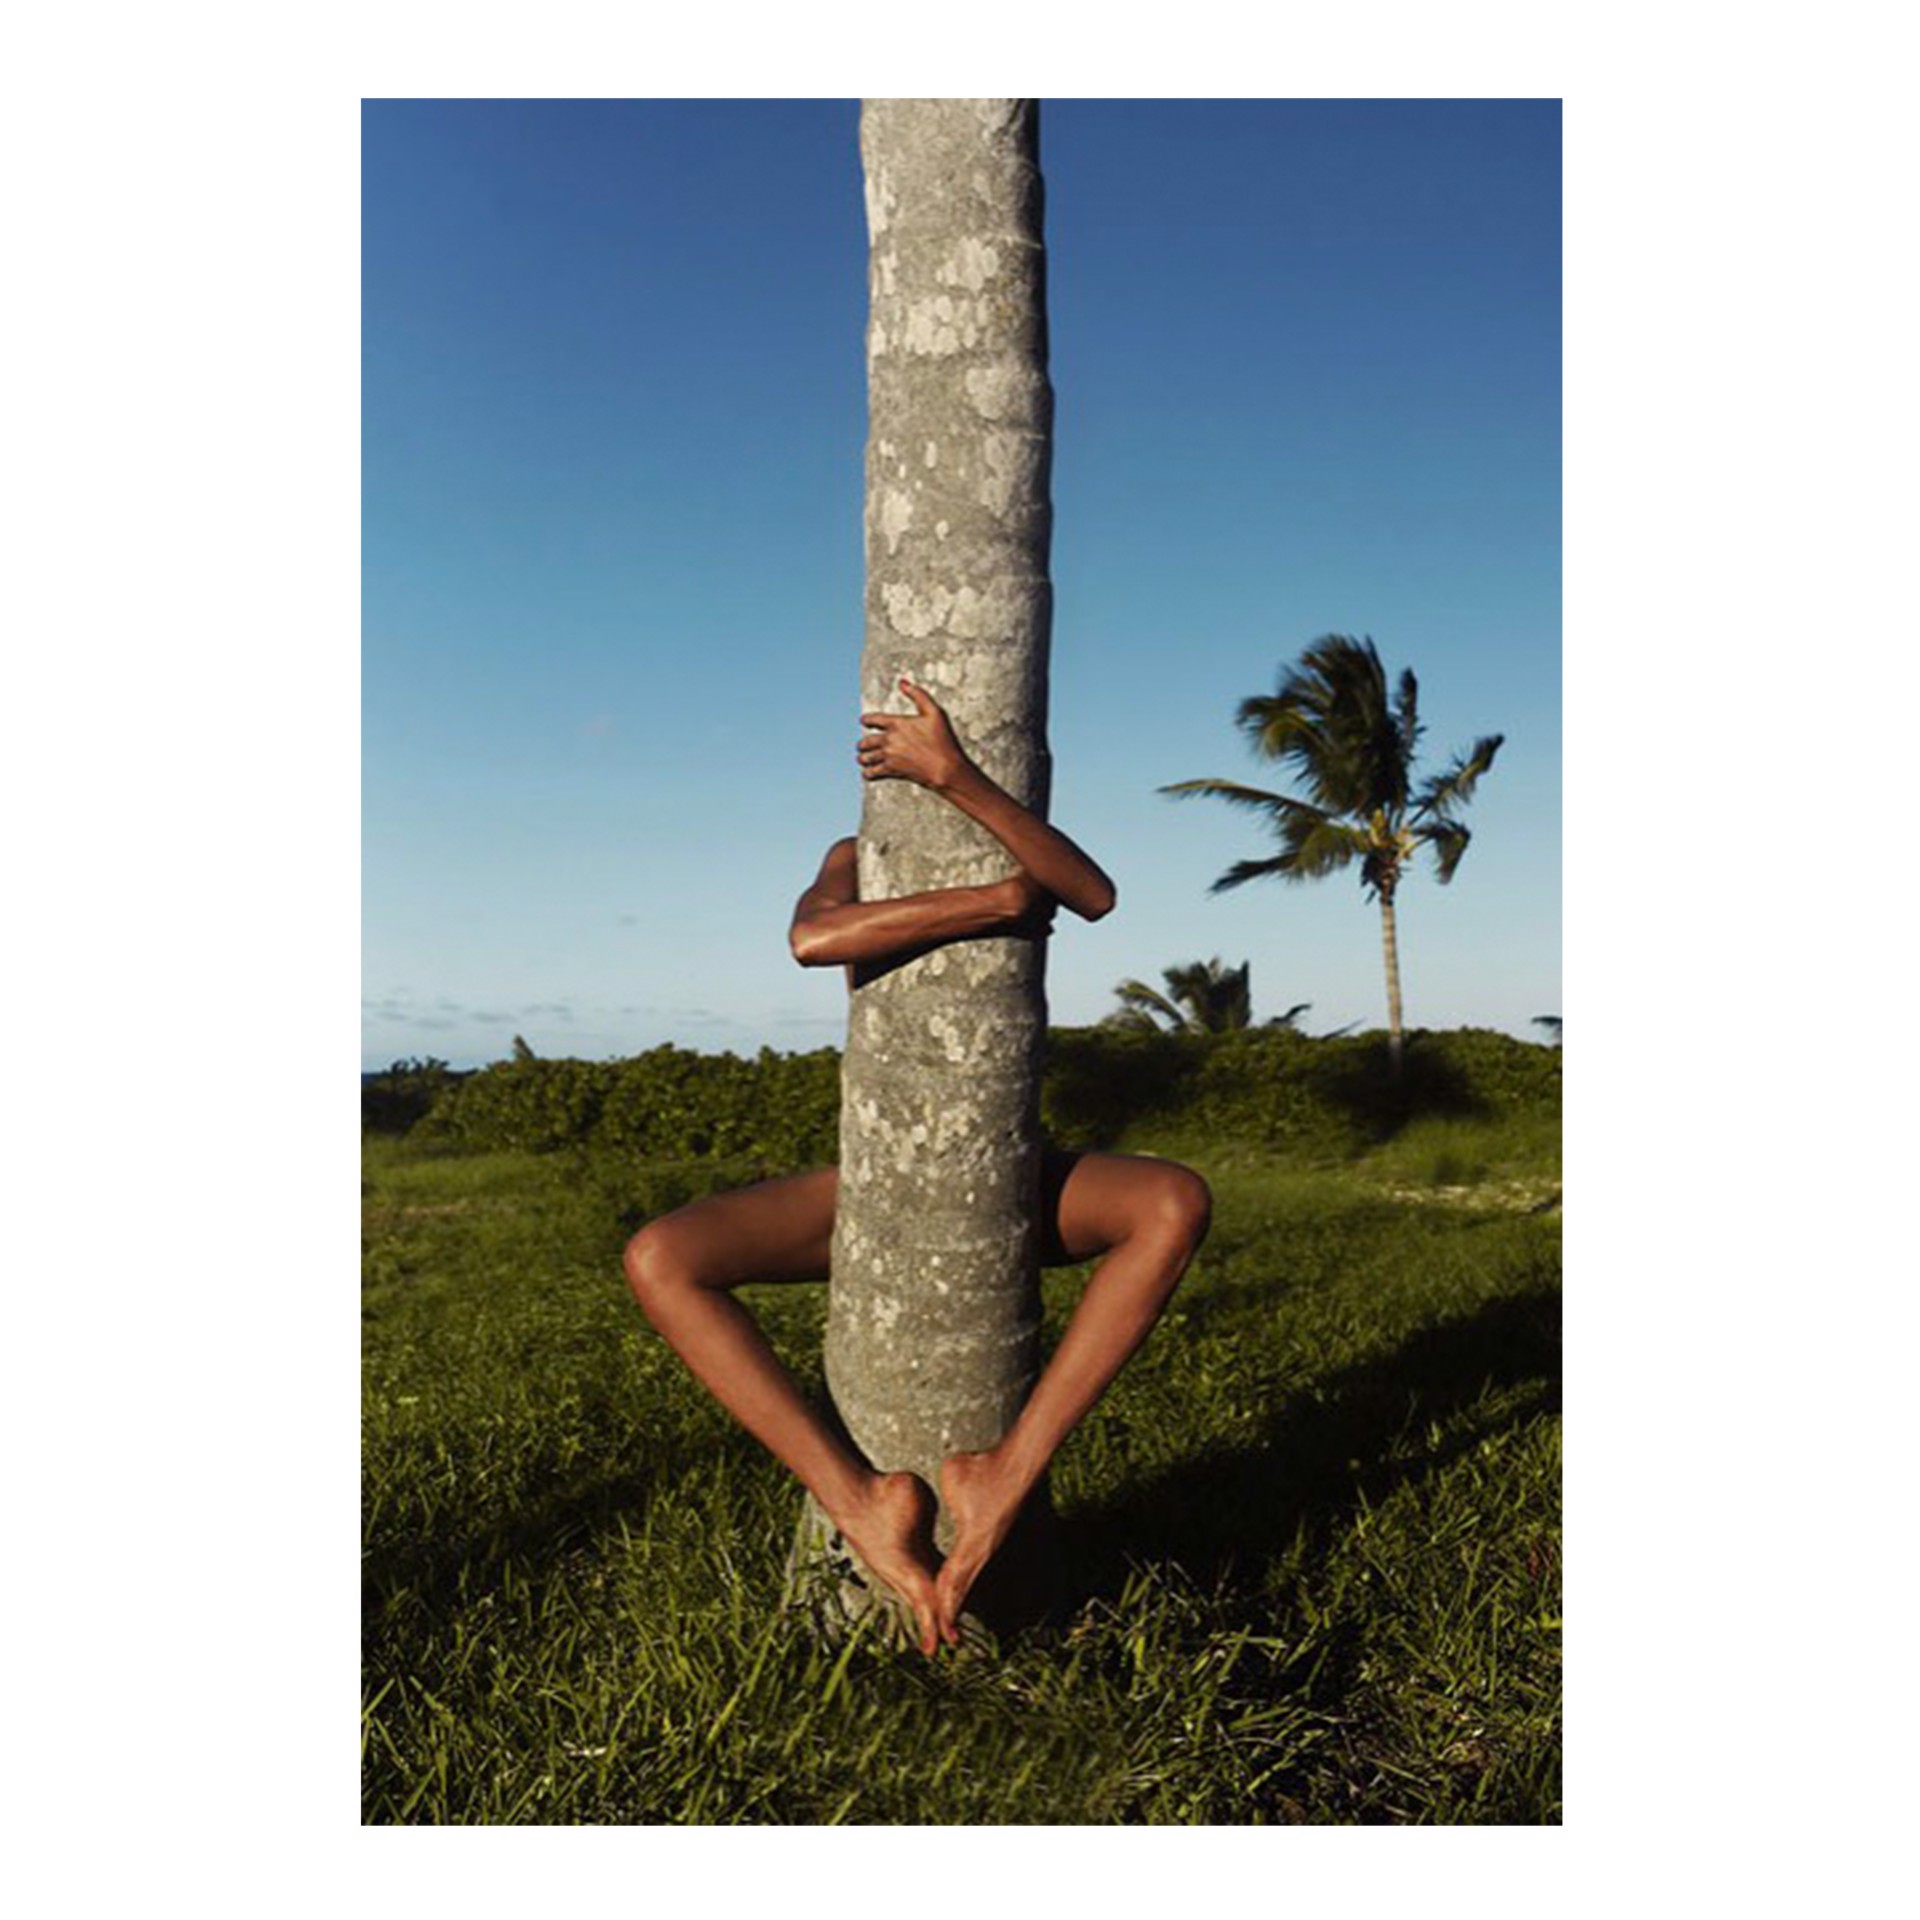 Wilmide Tree Hugger (Bahamas) by Jean-Philippe Piter